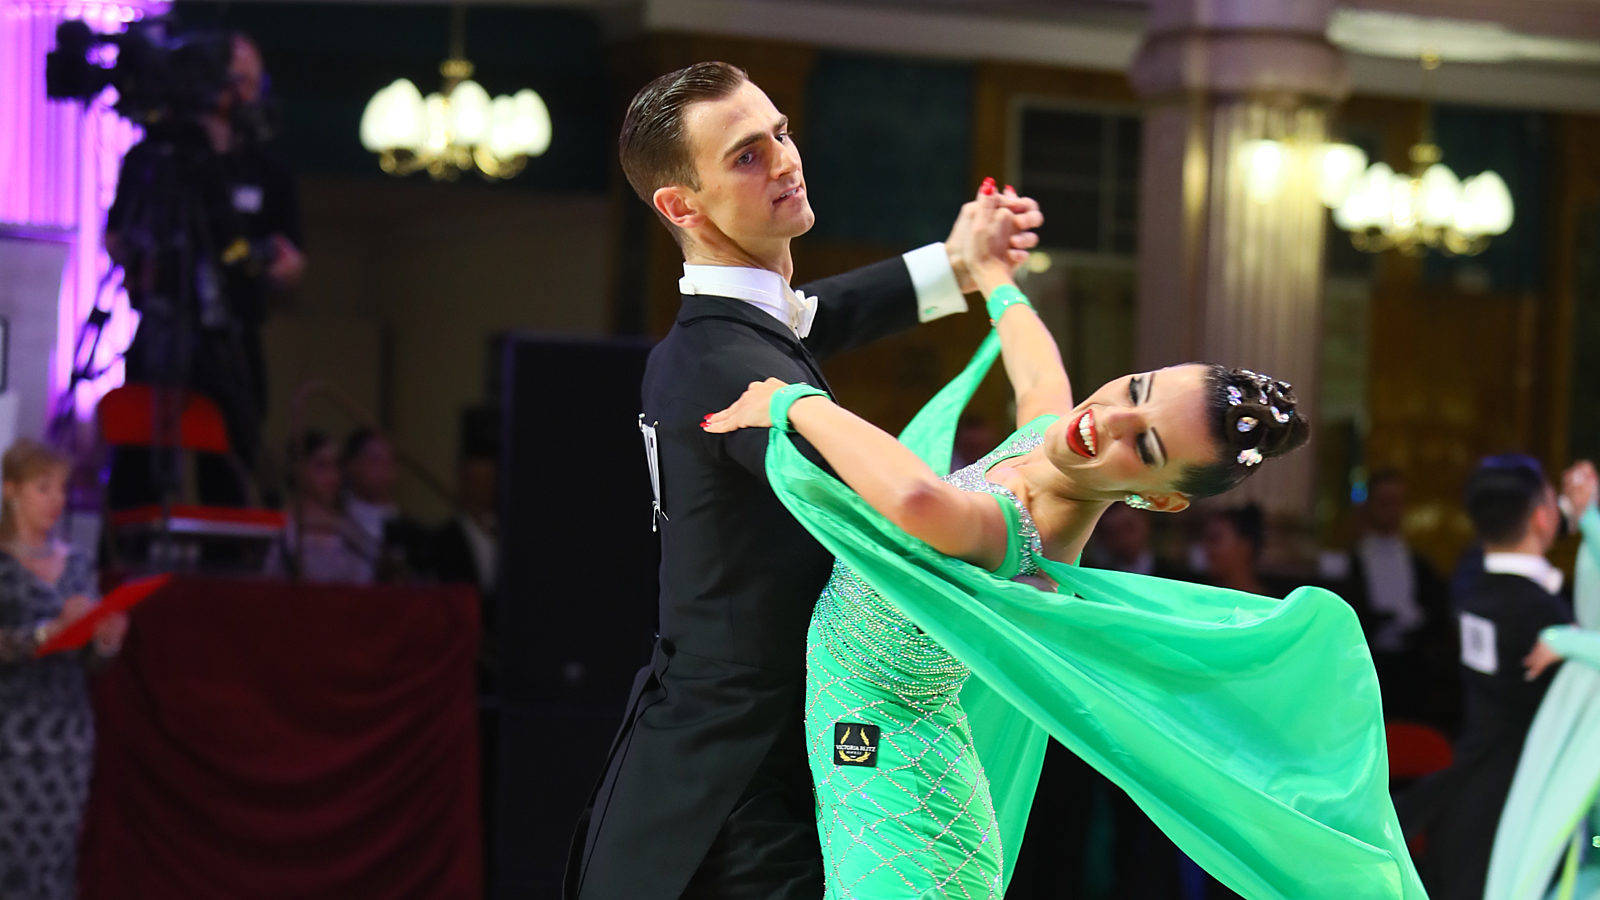 A pair of ballroom dancers dancing. She wears a green floating dress and he wears a suit.